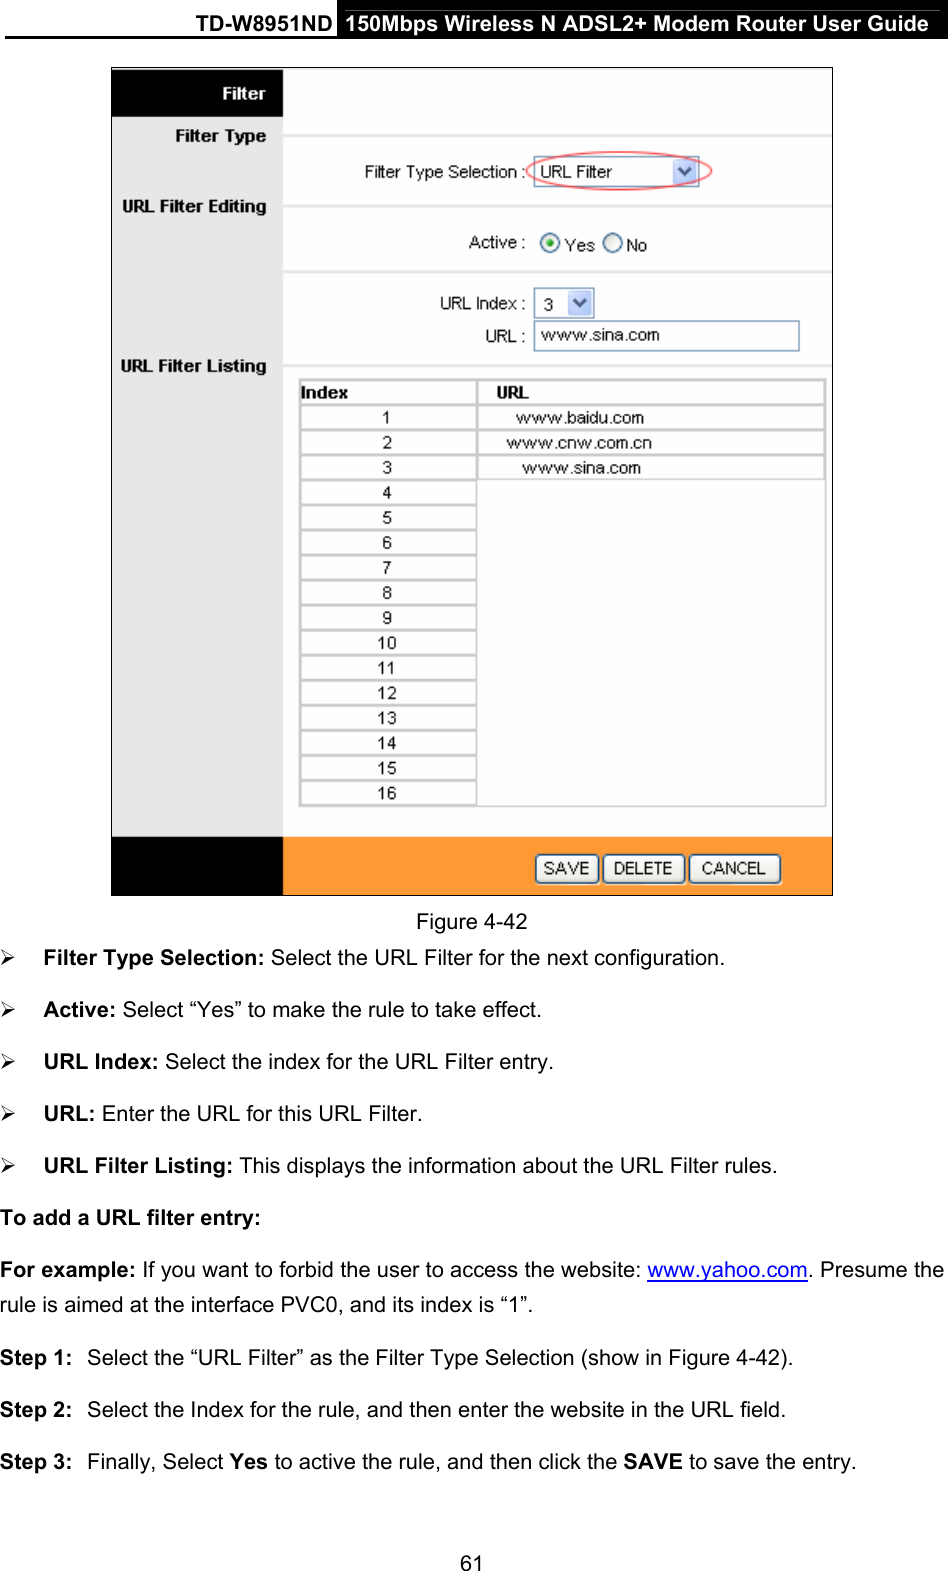 TD-W8951ND  150Mbps Wireless N ADSL2+ Modem Router User Guide  Figure 4-42 ¾ Filter Type Selection: Select the URL Filter for the next configuration. ¾ Active: Select “Yes” to make the rule to take effect. ¾ URL Index: Select the index for the URL Filter entry. ¾ URL: Enter the URL for this URL Filter. ¾ URL Filter Listing: This displays the information about the URL Filter rules. To add a URL filter entry: For example: If you want to forbid the user to access the website: www.yahoo.com. Presume the rule is aimed at the interface PVC0, and its index is “1”. Step 1:  Select the “URL Filter” as the Filter Type Selection (show in Figure 4-42). Step 2:  Select the Index for the rule, and then enter the website in the URL field. Step 3:  Finally, Select Yes to active the rule, and then click the SAVE to save the entry. 61 